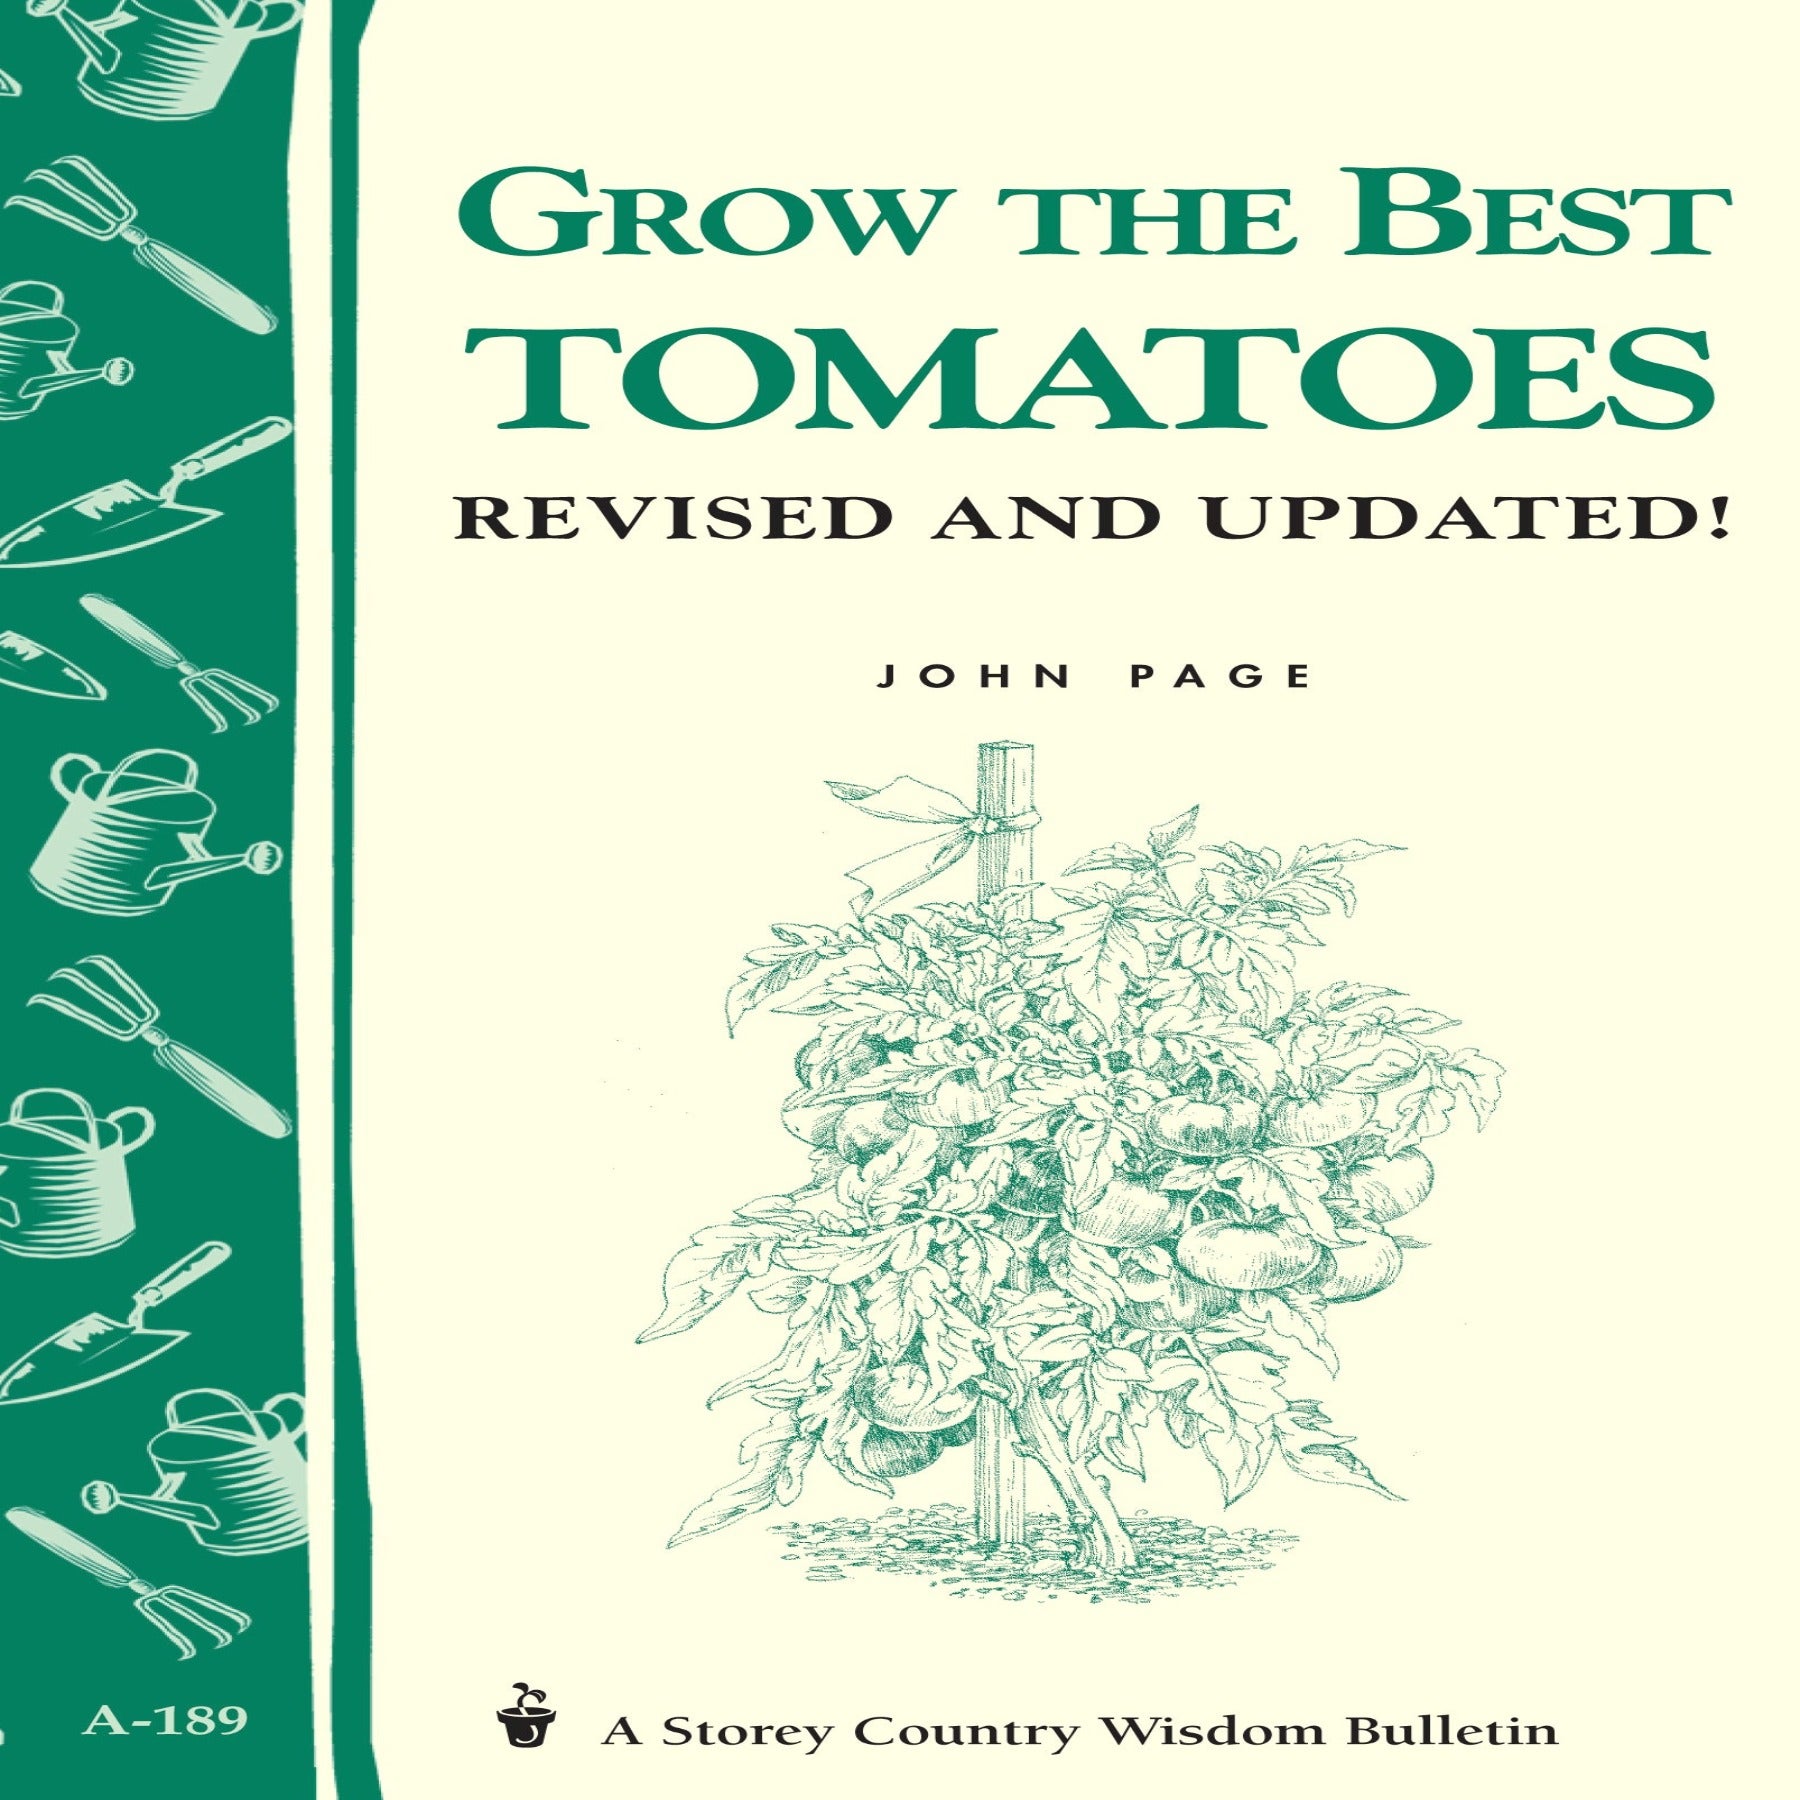 Book:  Growing the Best Tomatoes